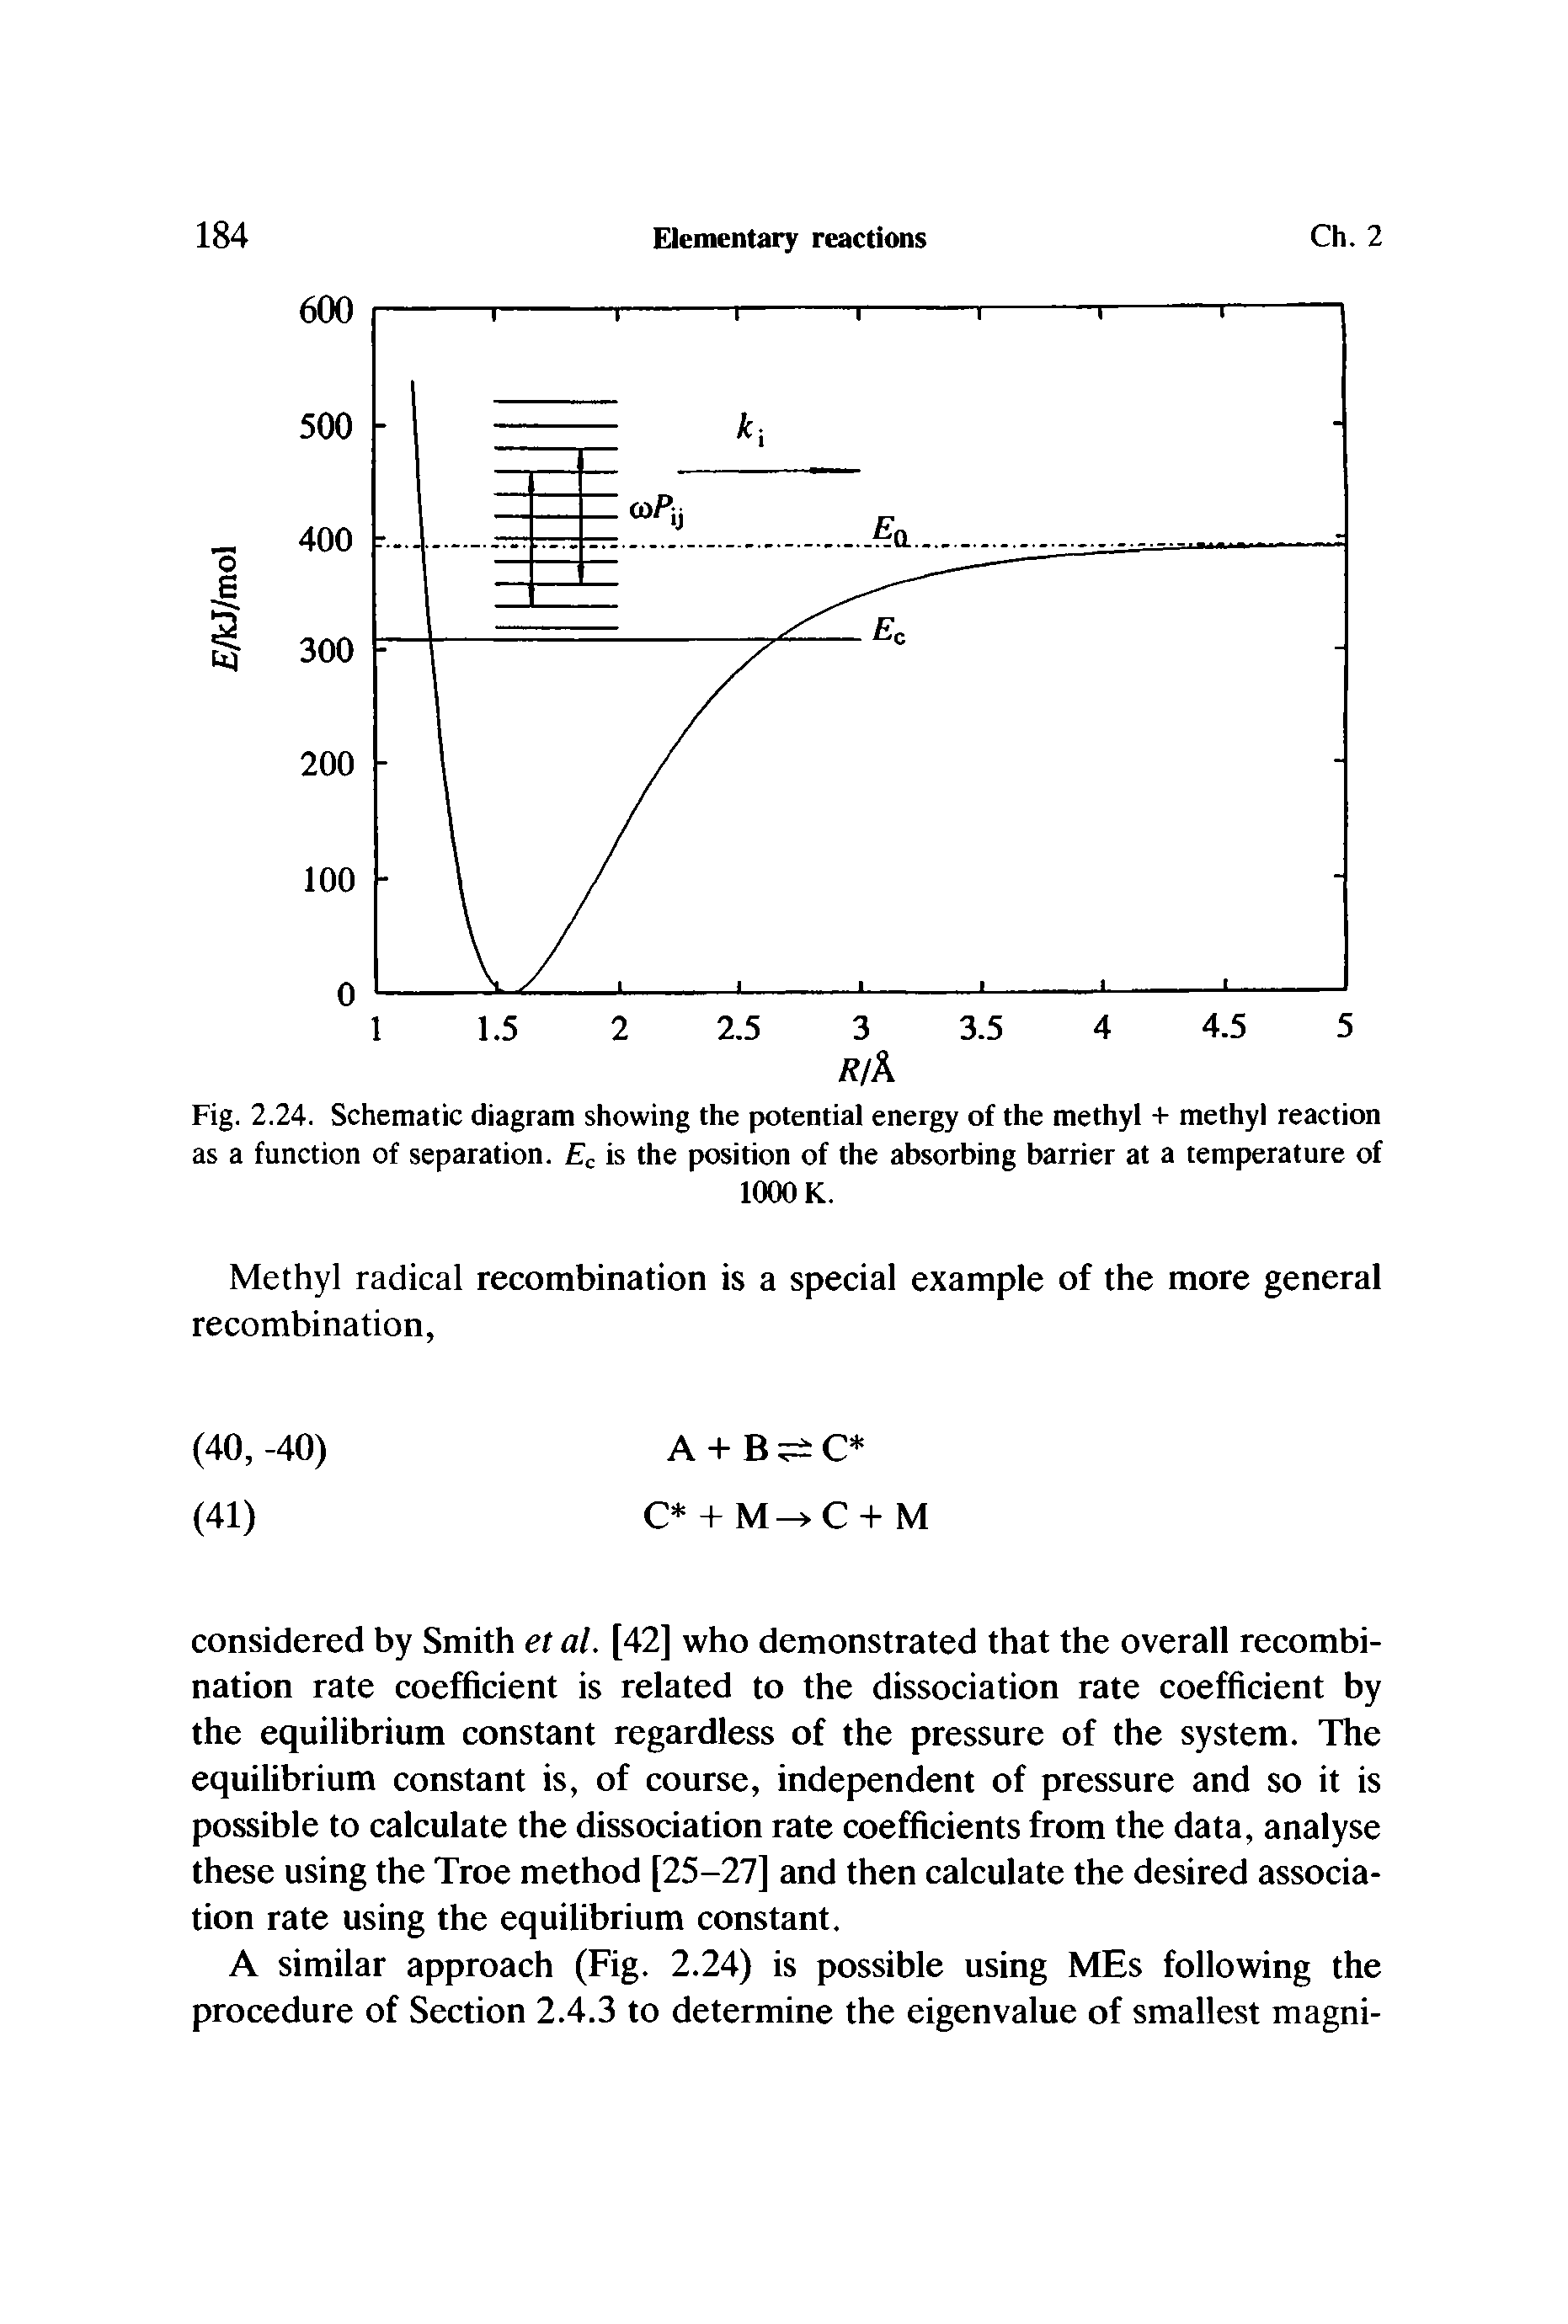 Fig. 2.24. Schematic diagram showing the potential energy of the methyl + methyl reaction as a function of separation. Ec is the position of the absorbing barrier at a temperature of...